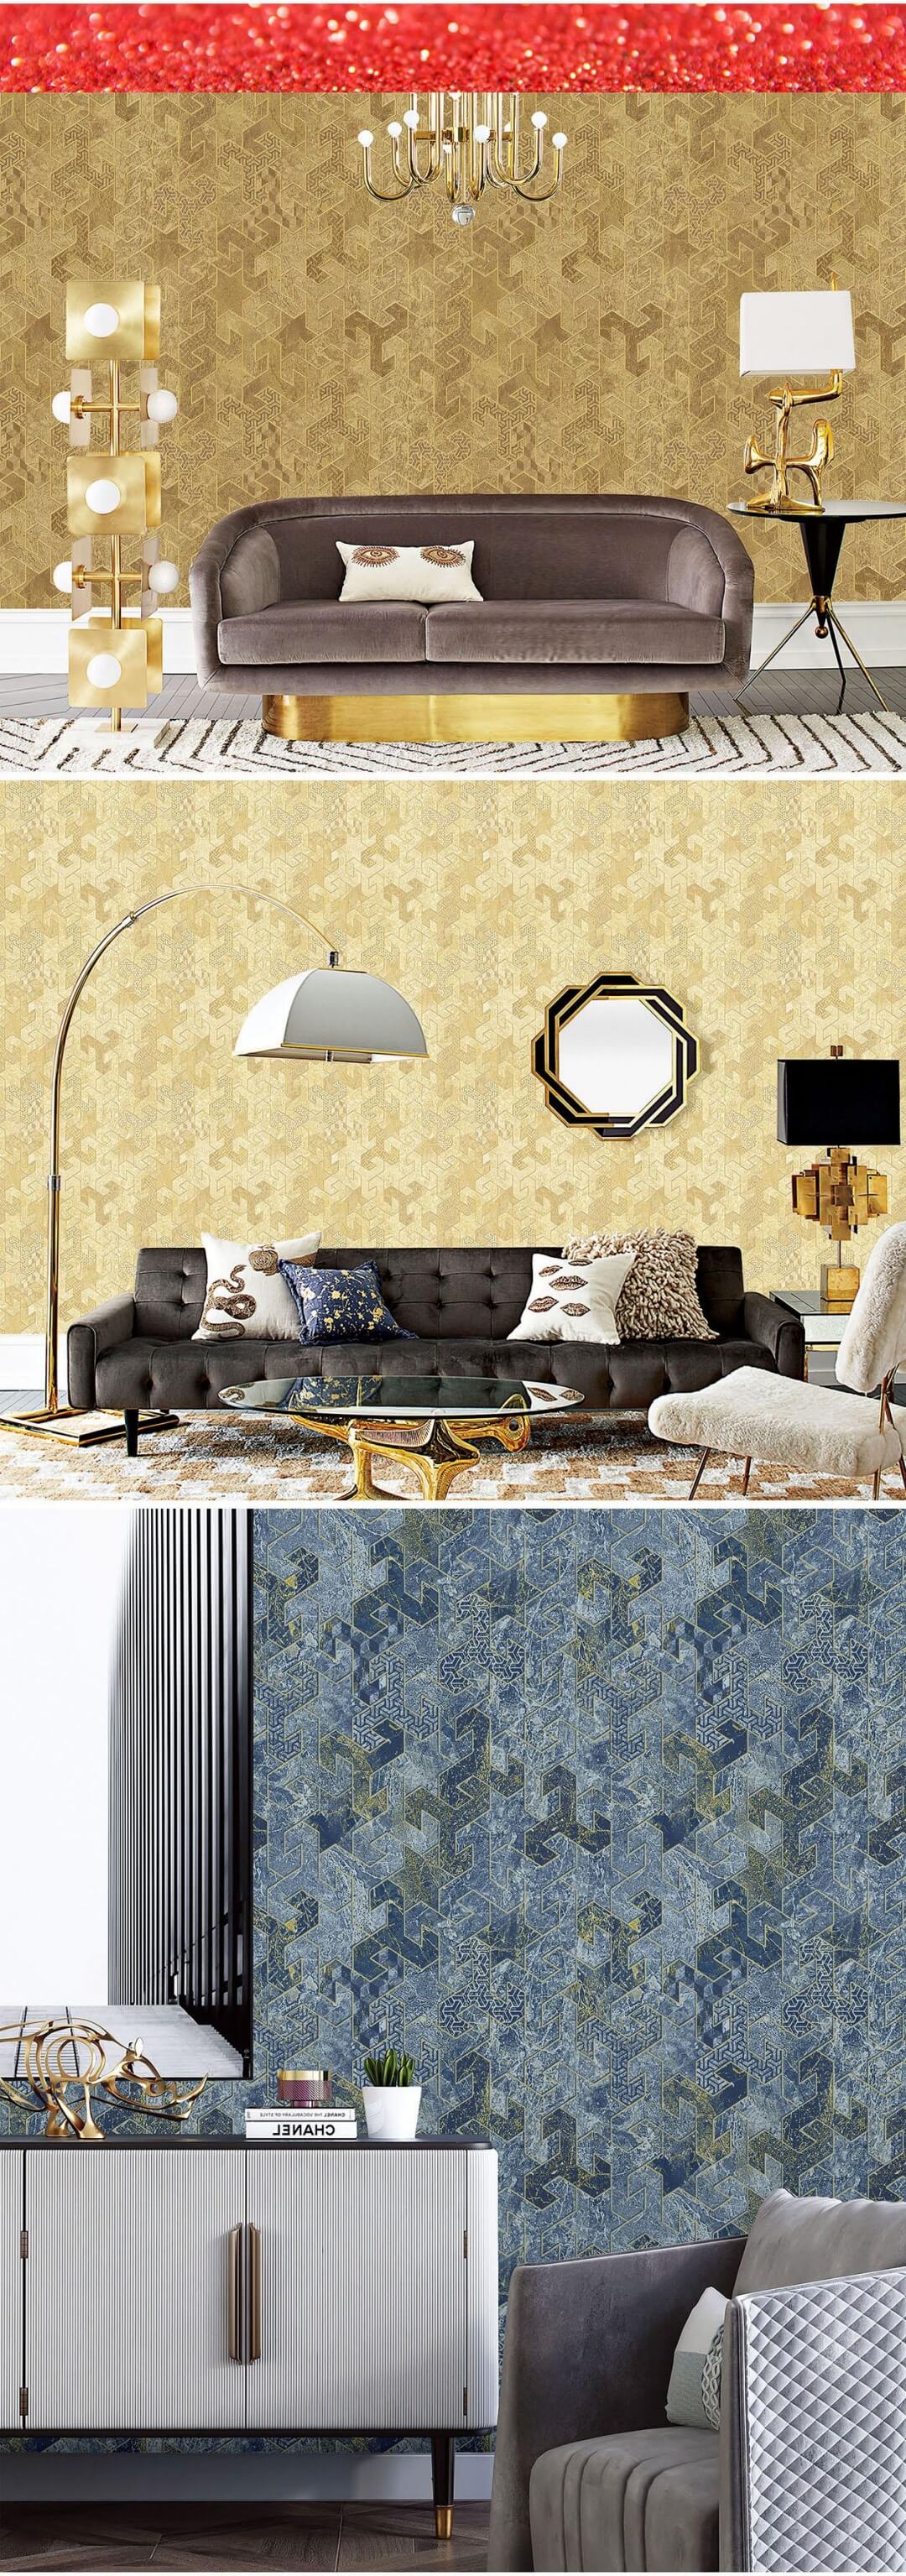 3D Wallpaper for home decoration (5)